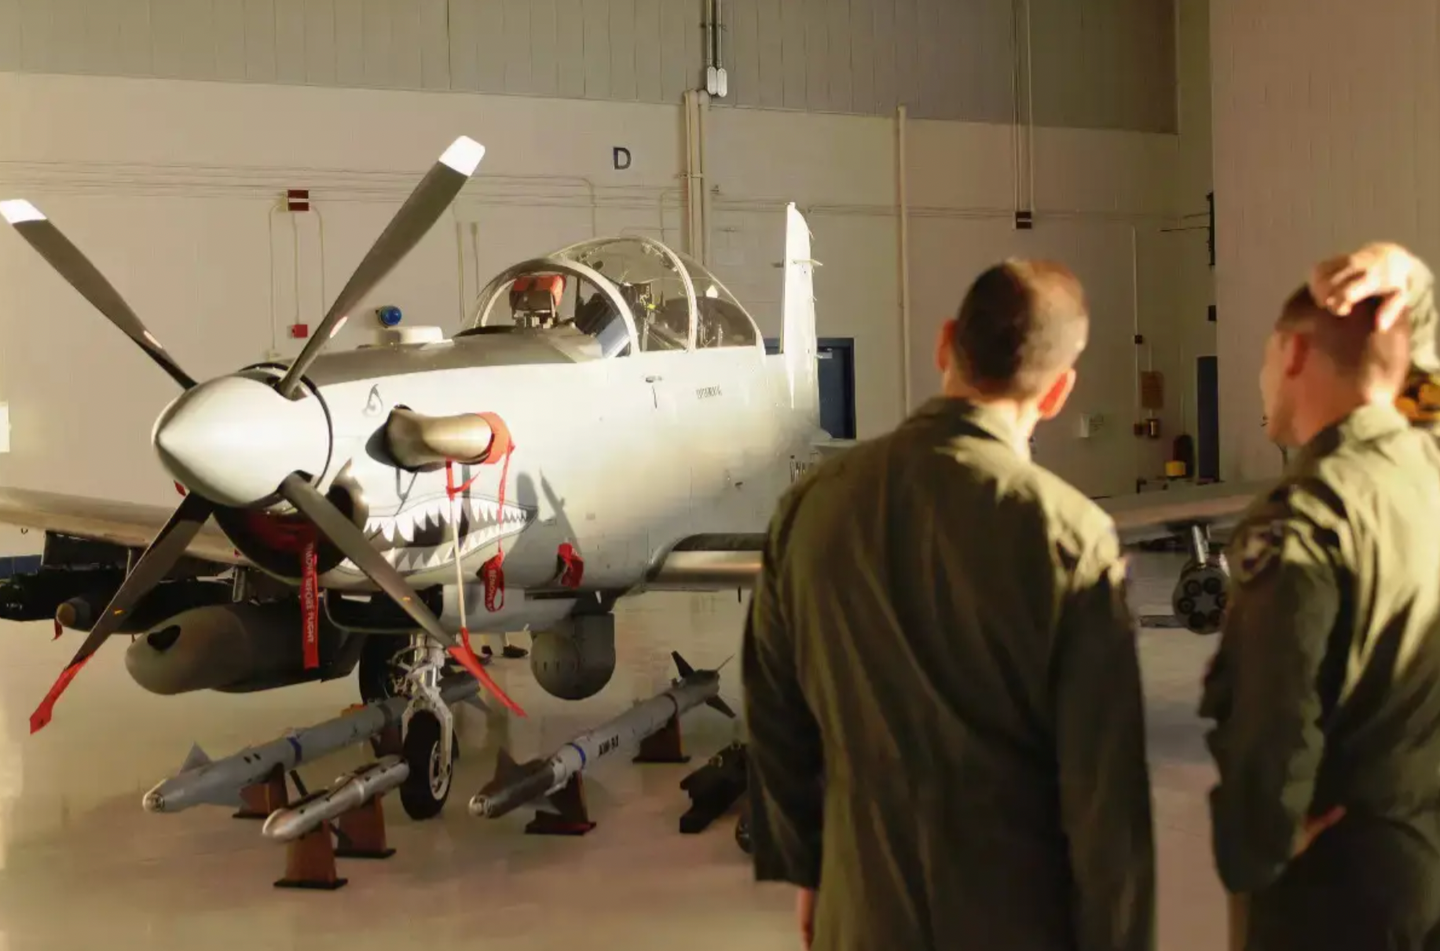 Members of the Air National Guard look at an example of what was then known as the AT-6C during tests in 2010. Interestingly two AIM-9X air-to-air missiles are among the ordnance laid out in front of the aircraft.&nbsp;<em>USAF</em>